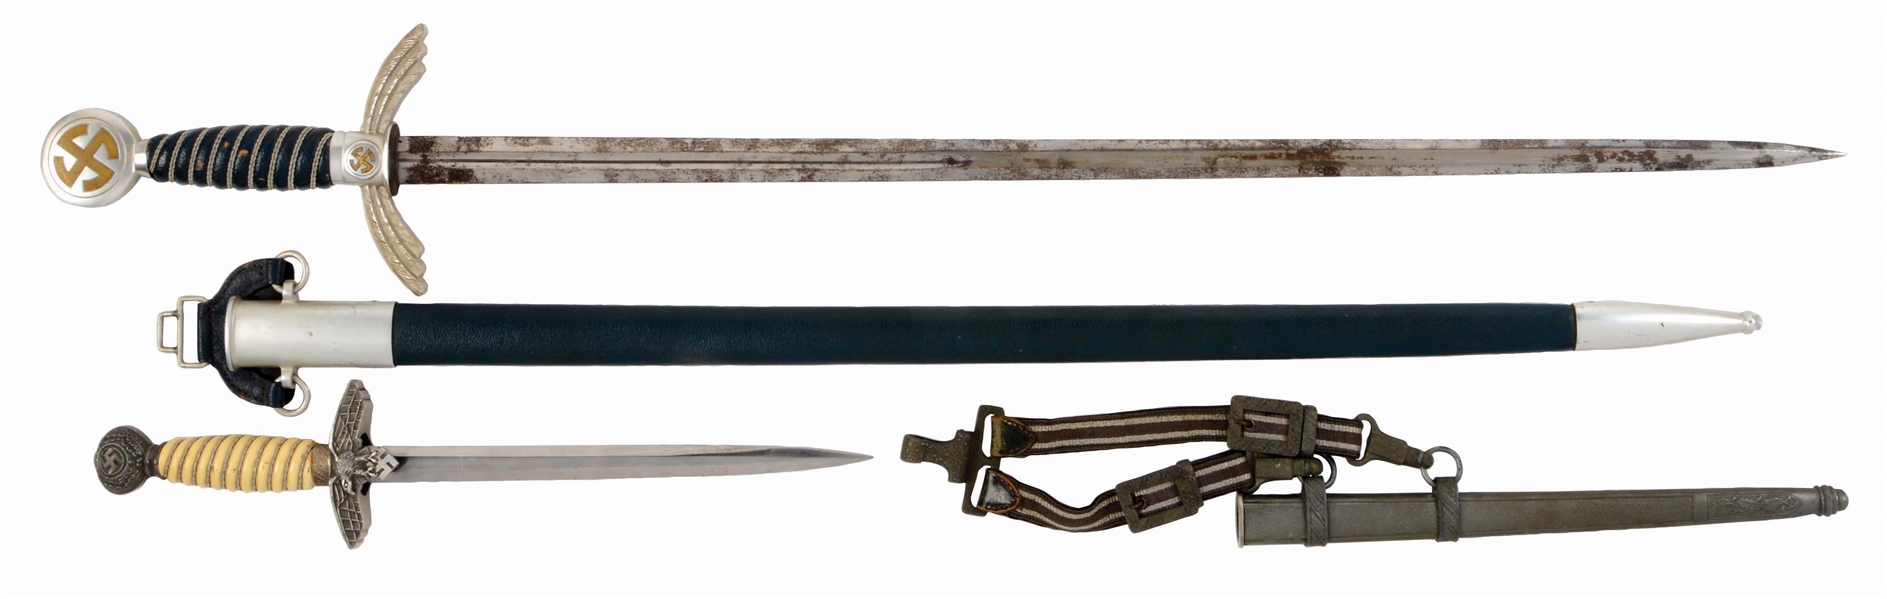 LOT OF 2: GERMAN WWII LUFTWAFFE SWORD AND DAGGER